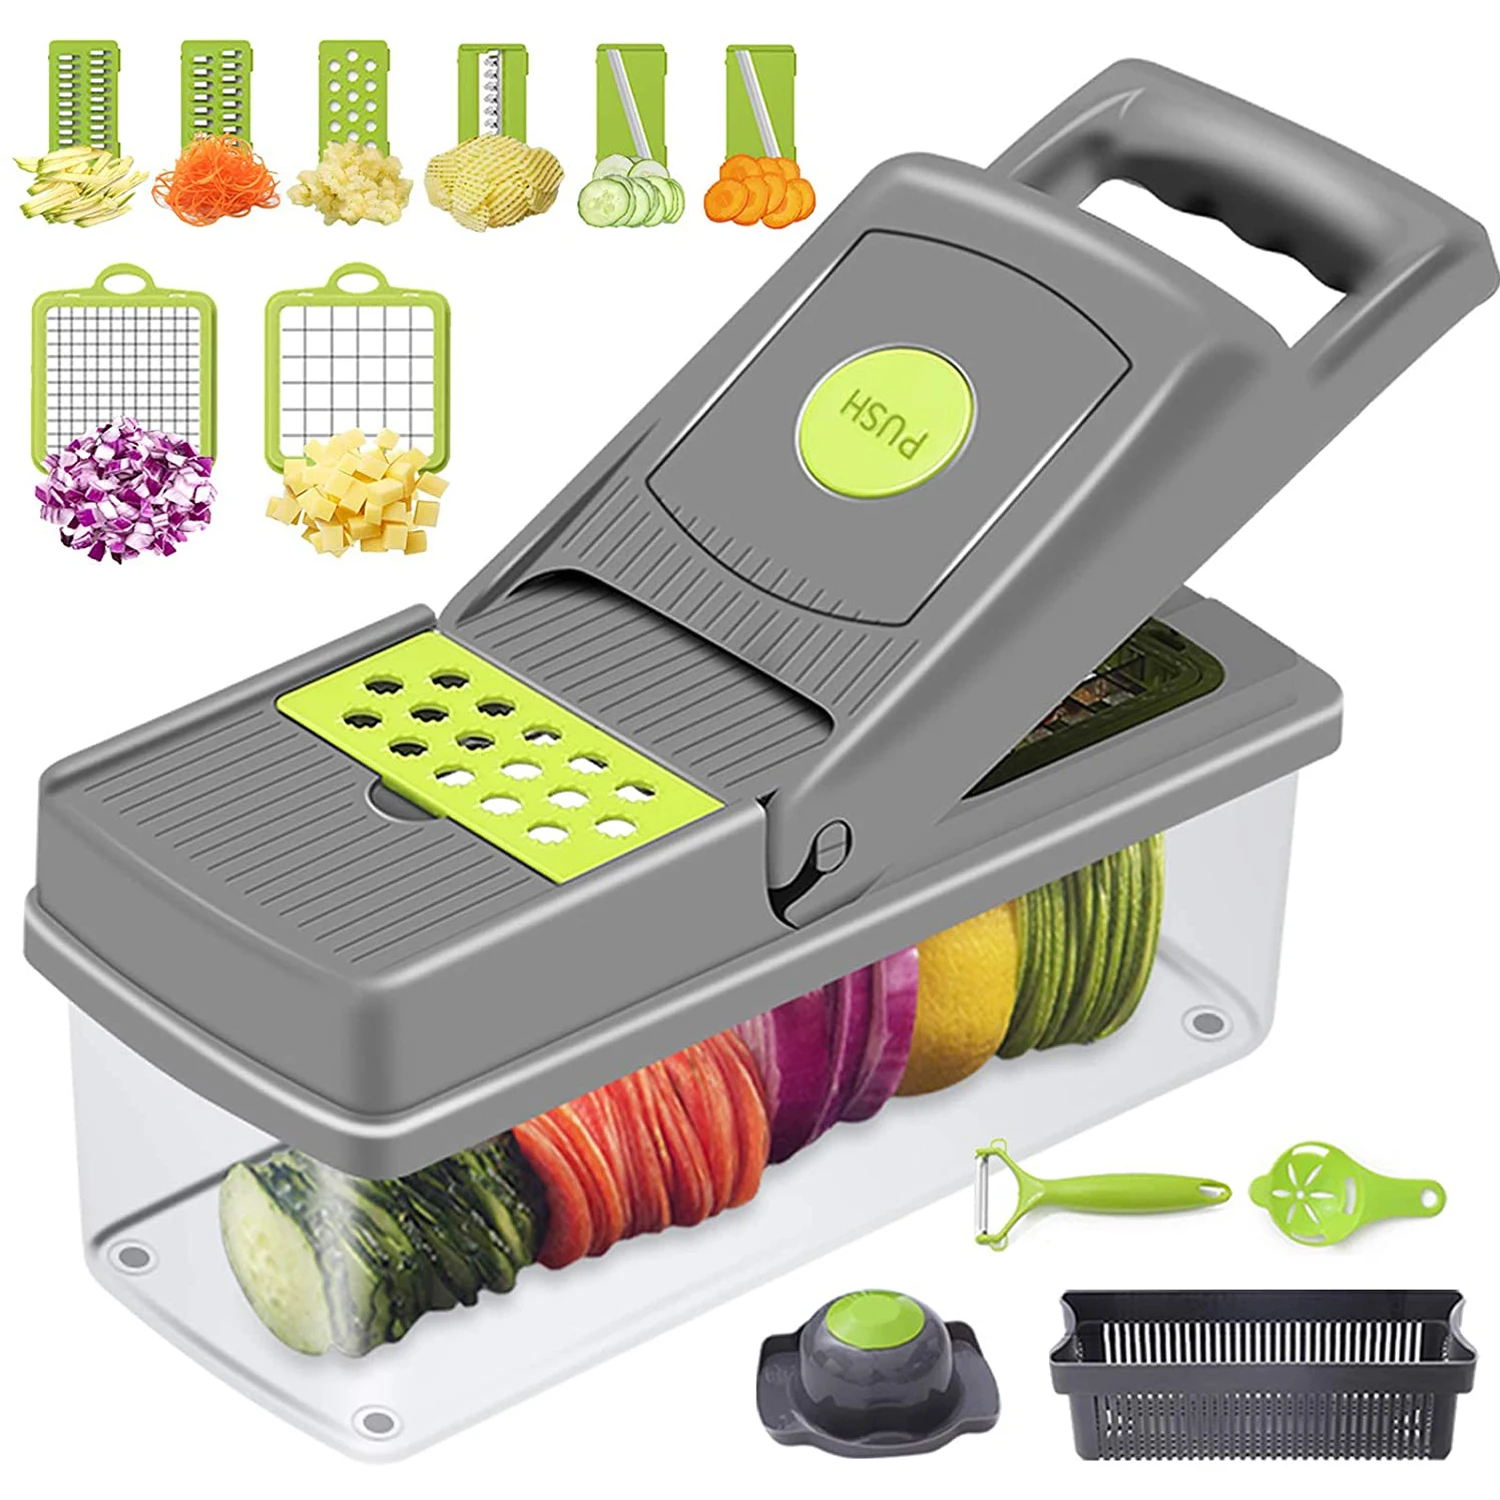 

New 12 In 1 Multifunctional Vegetable Cutter Vegetable Chopper Potato Cheese Slicer Spiralizer Mandolin Grater With Container